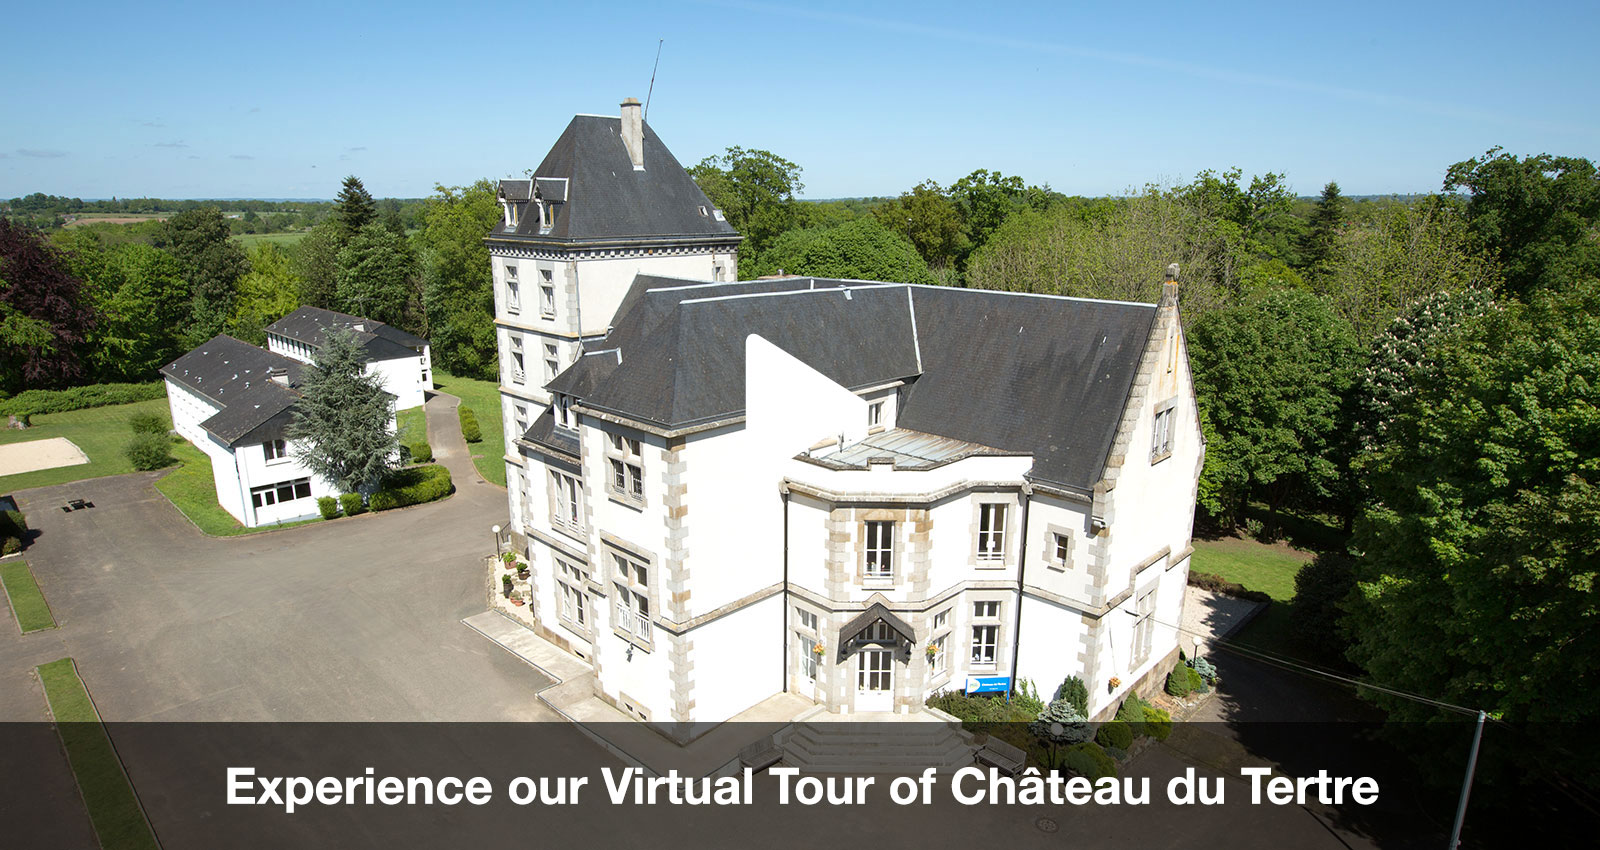 Primary School Trips to Chateau du Tertre Normandy